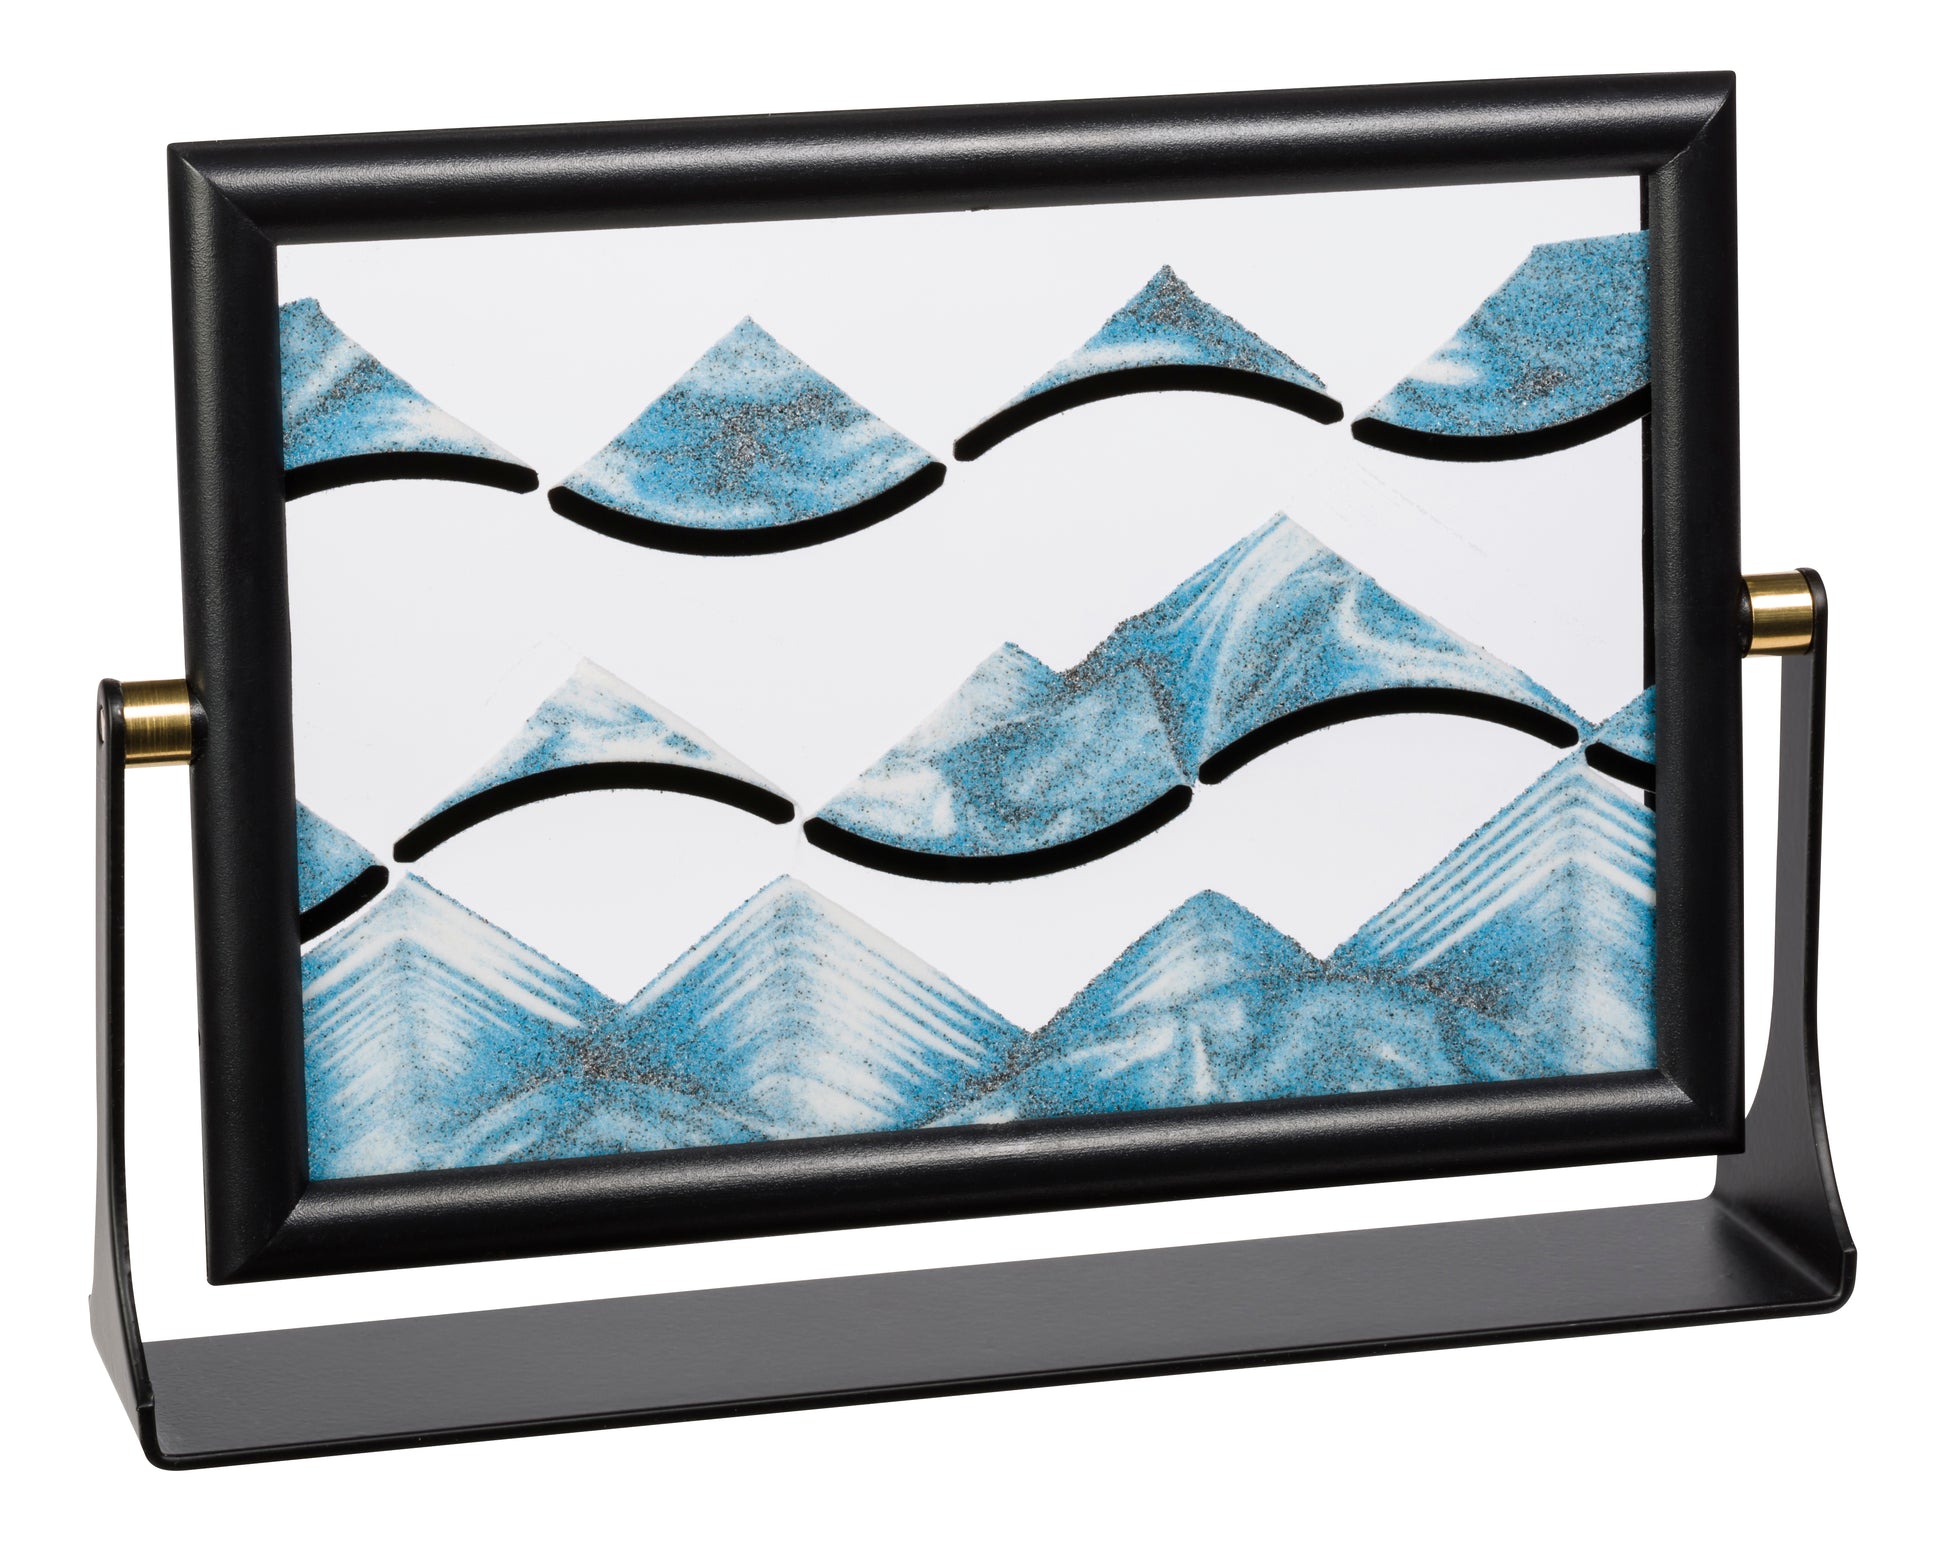 A desktop motion relaxer with a solid black frame and base with sleek gold connectors that allow the frame to flip. Blue and white sand is contained inside.